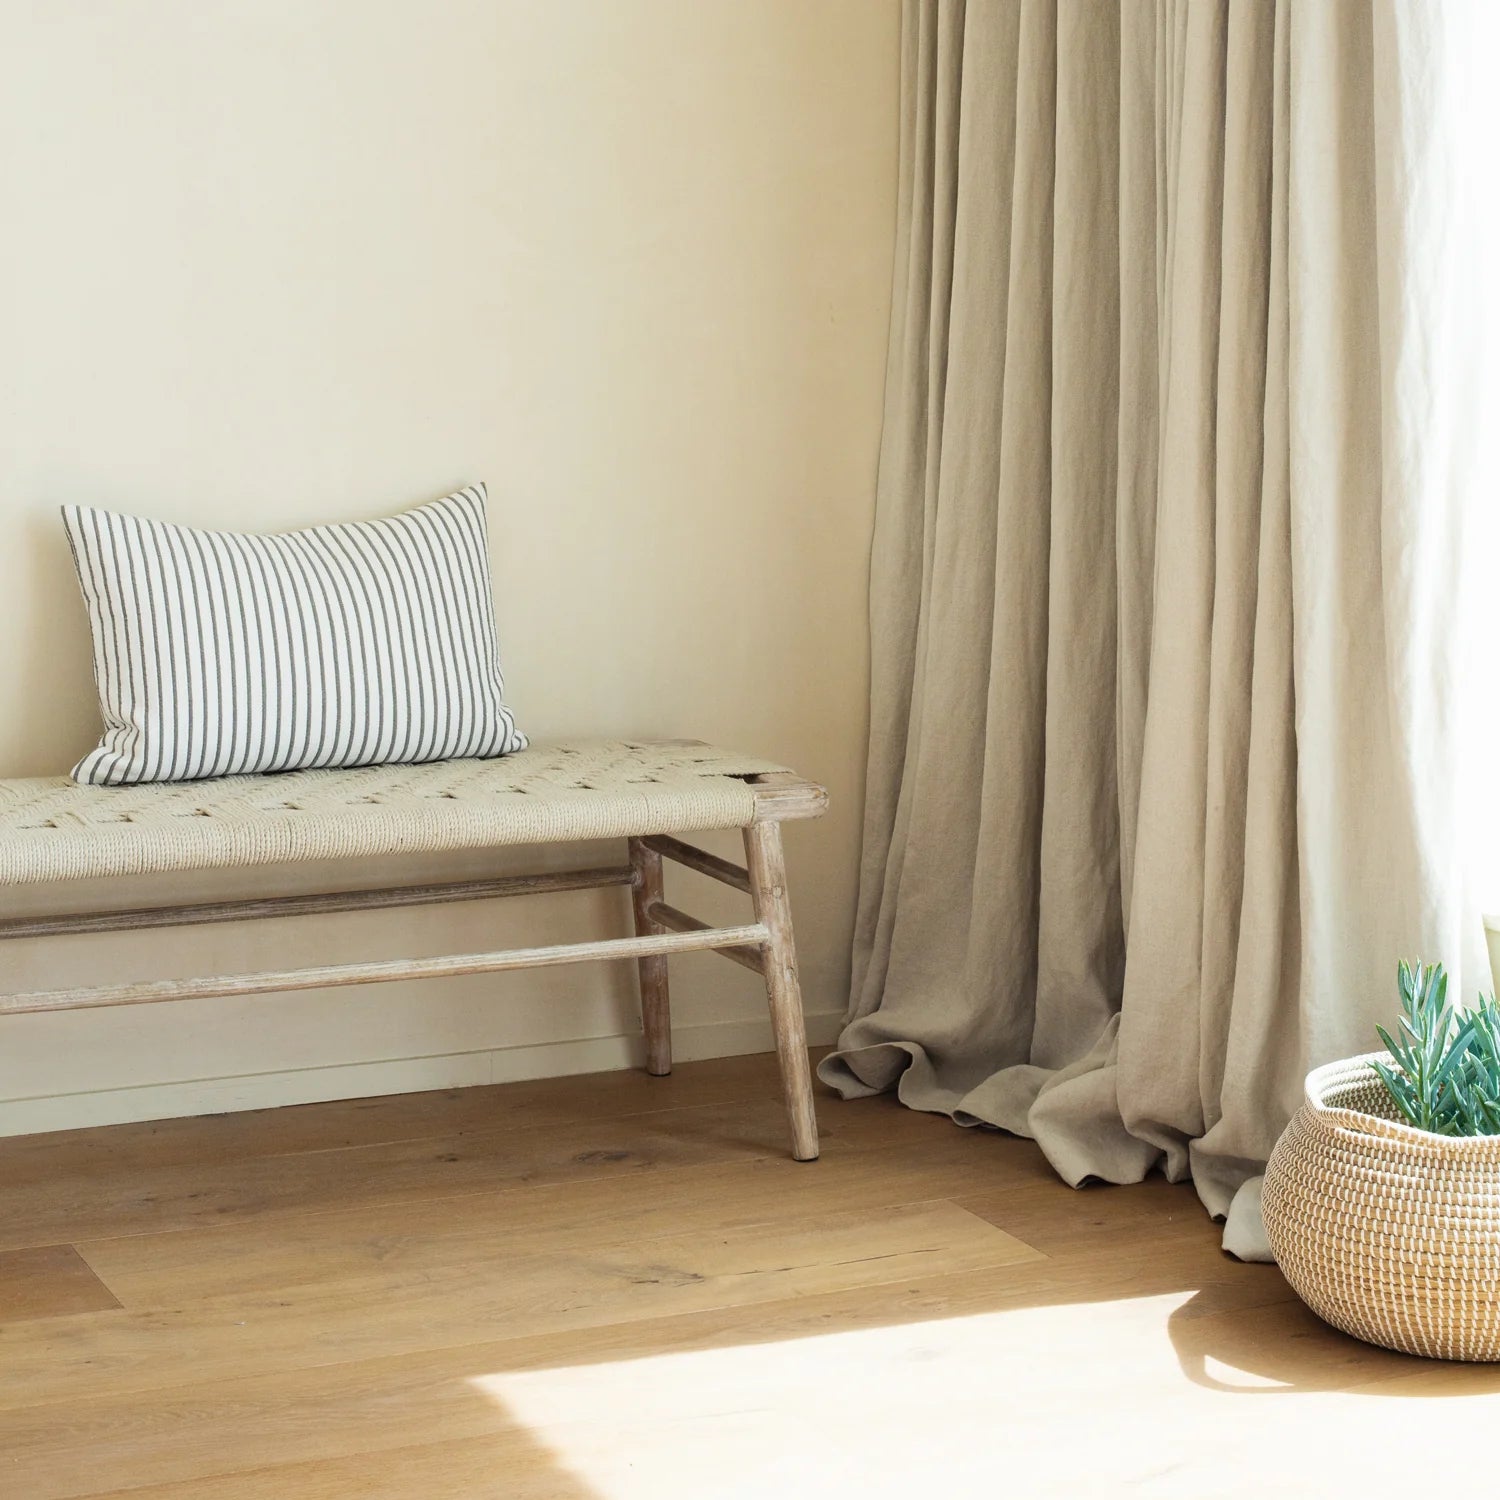 A neutral room with sunlight coming through the window. The wooden bench is against the wall with a striped cushion.